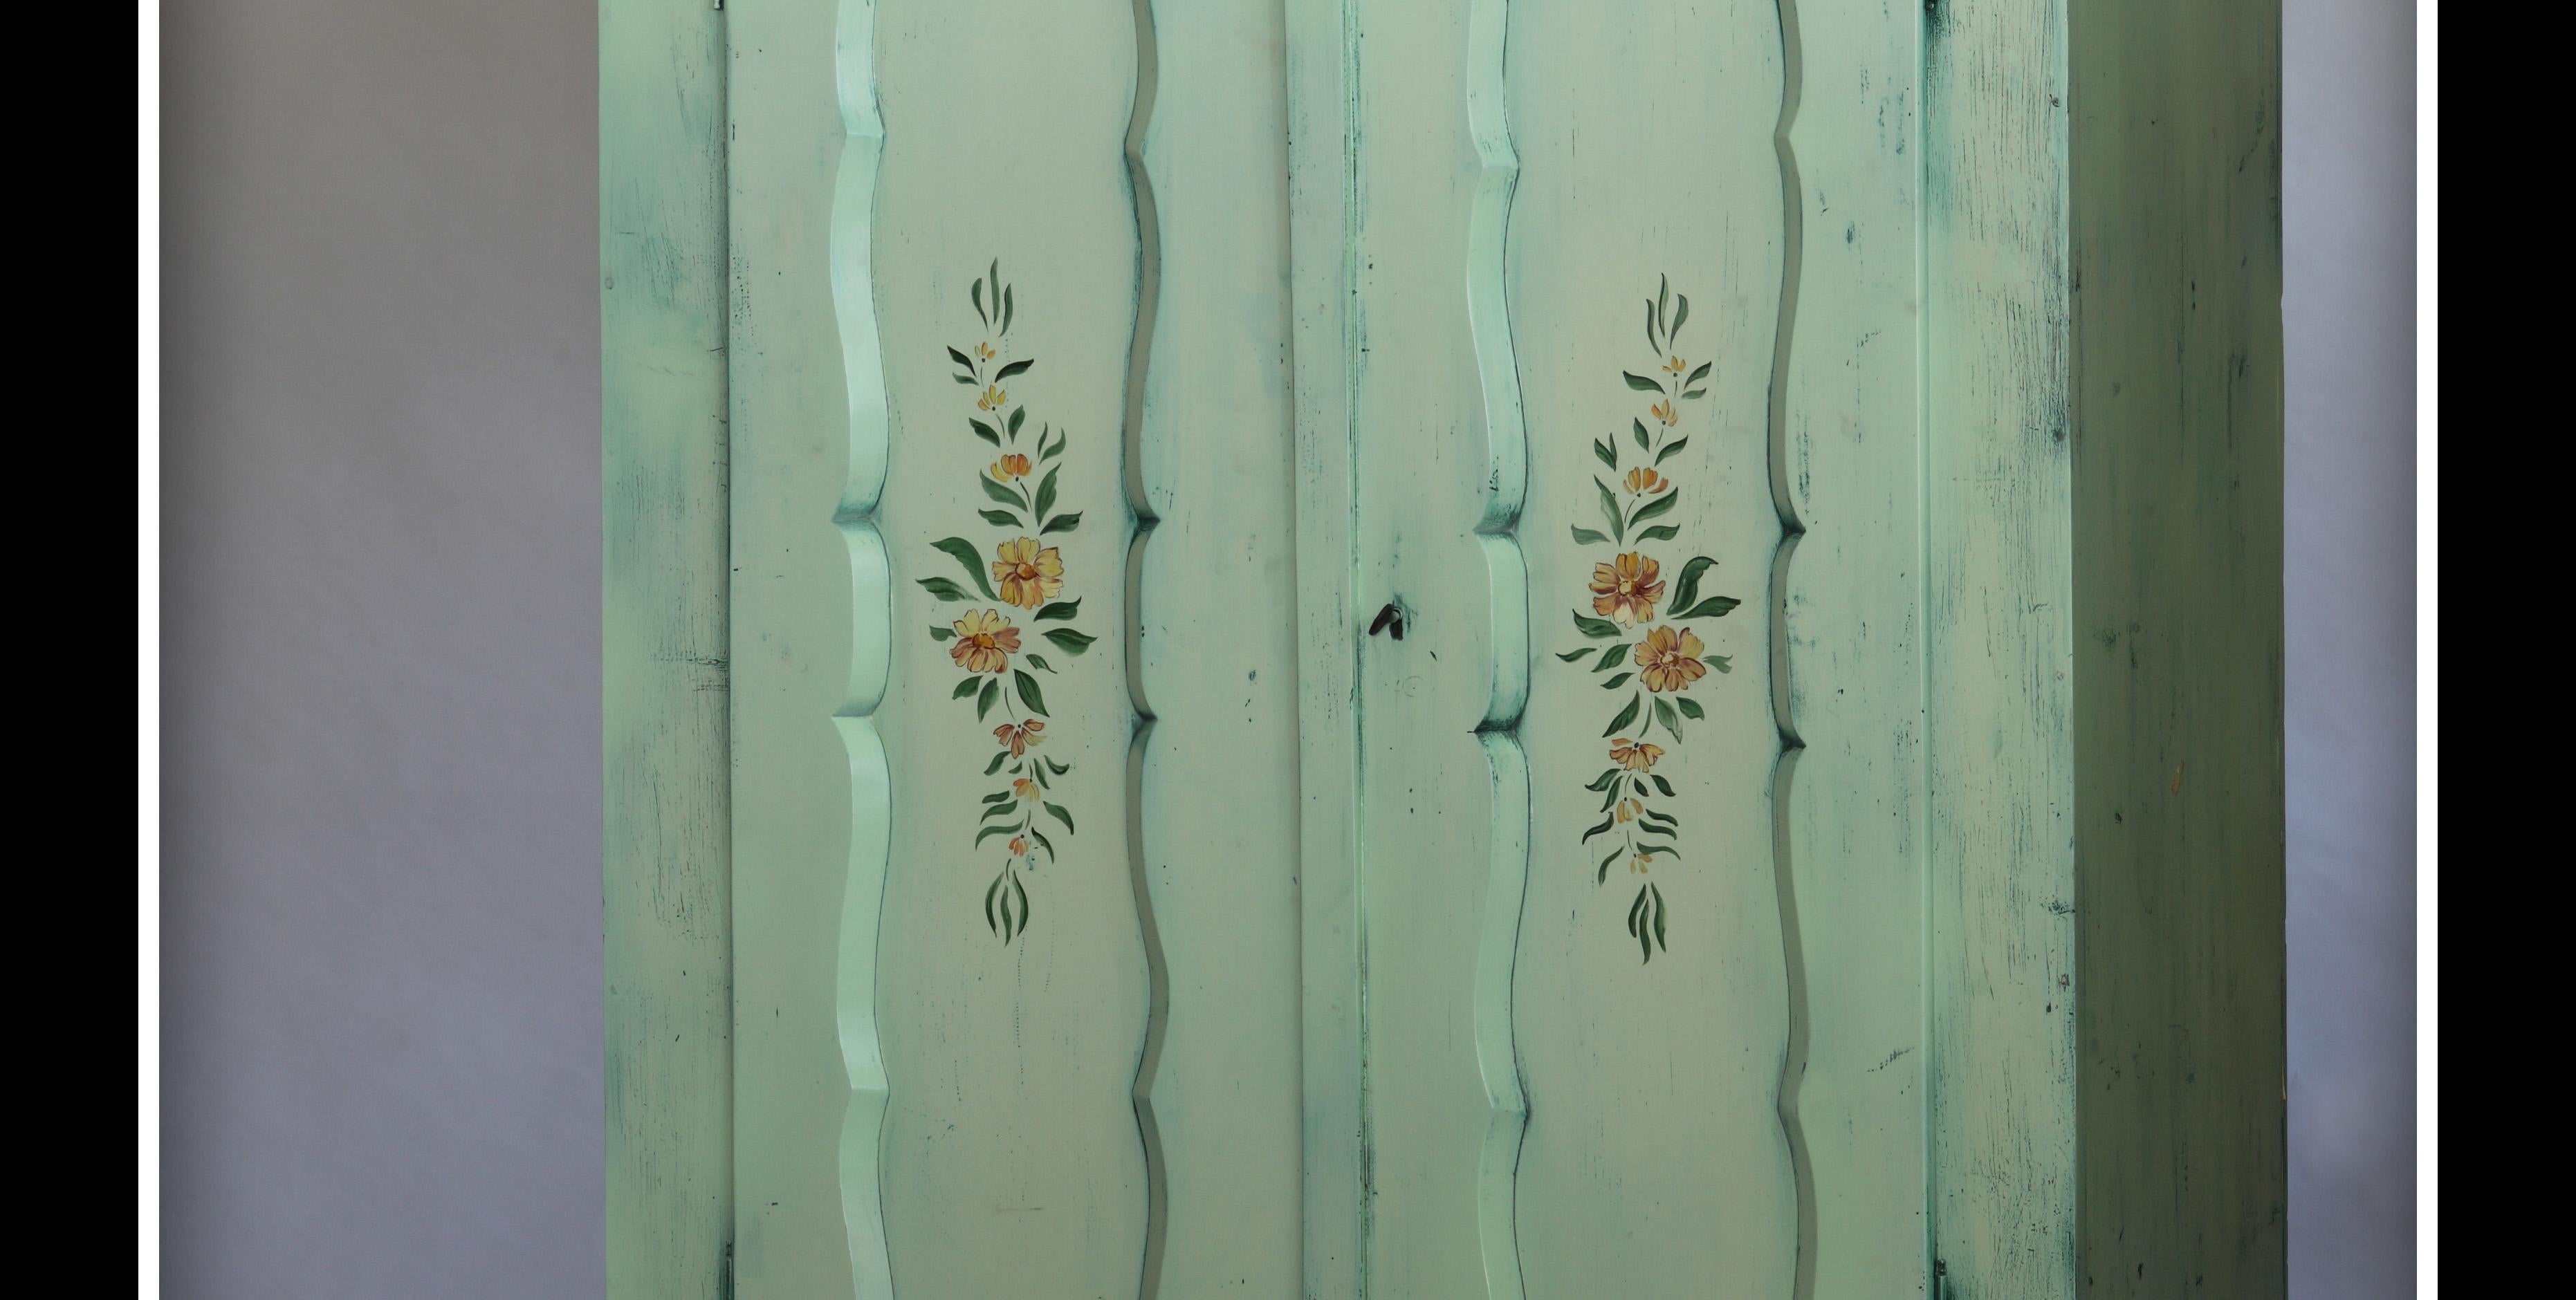 Green cabinet with flower patter, hand painted
The two doors cabinet has special surface, thanks to the antique effect painting. On
the doors are flower paintings by an artist. The intimate, folksy cabinet looks good in
bedrooms, or farmhouses,